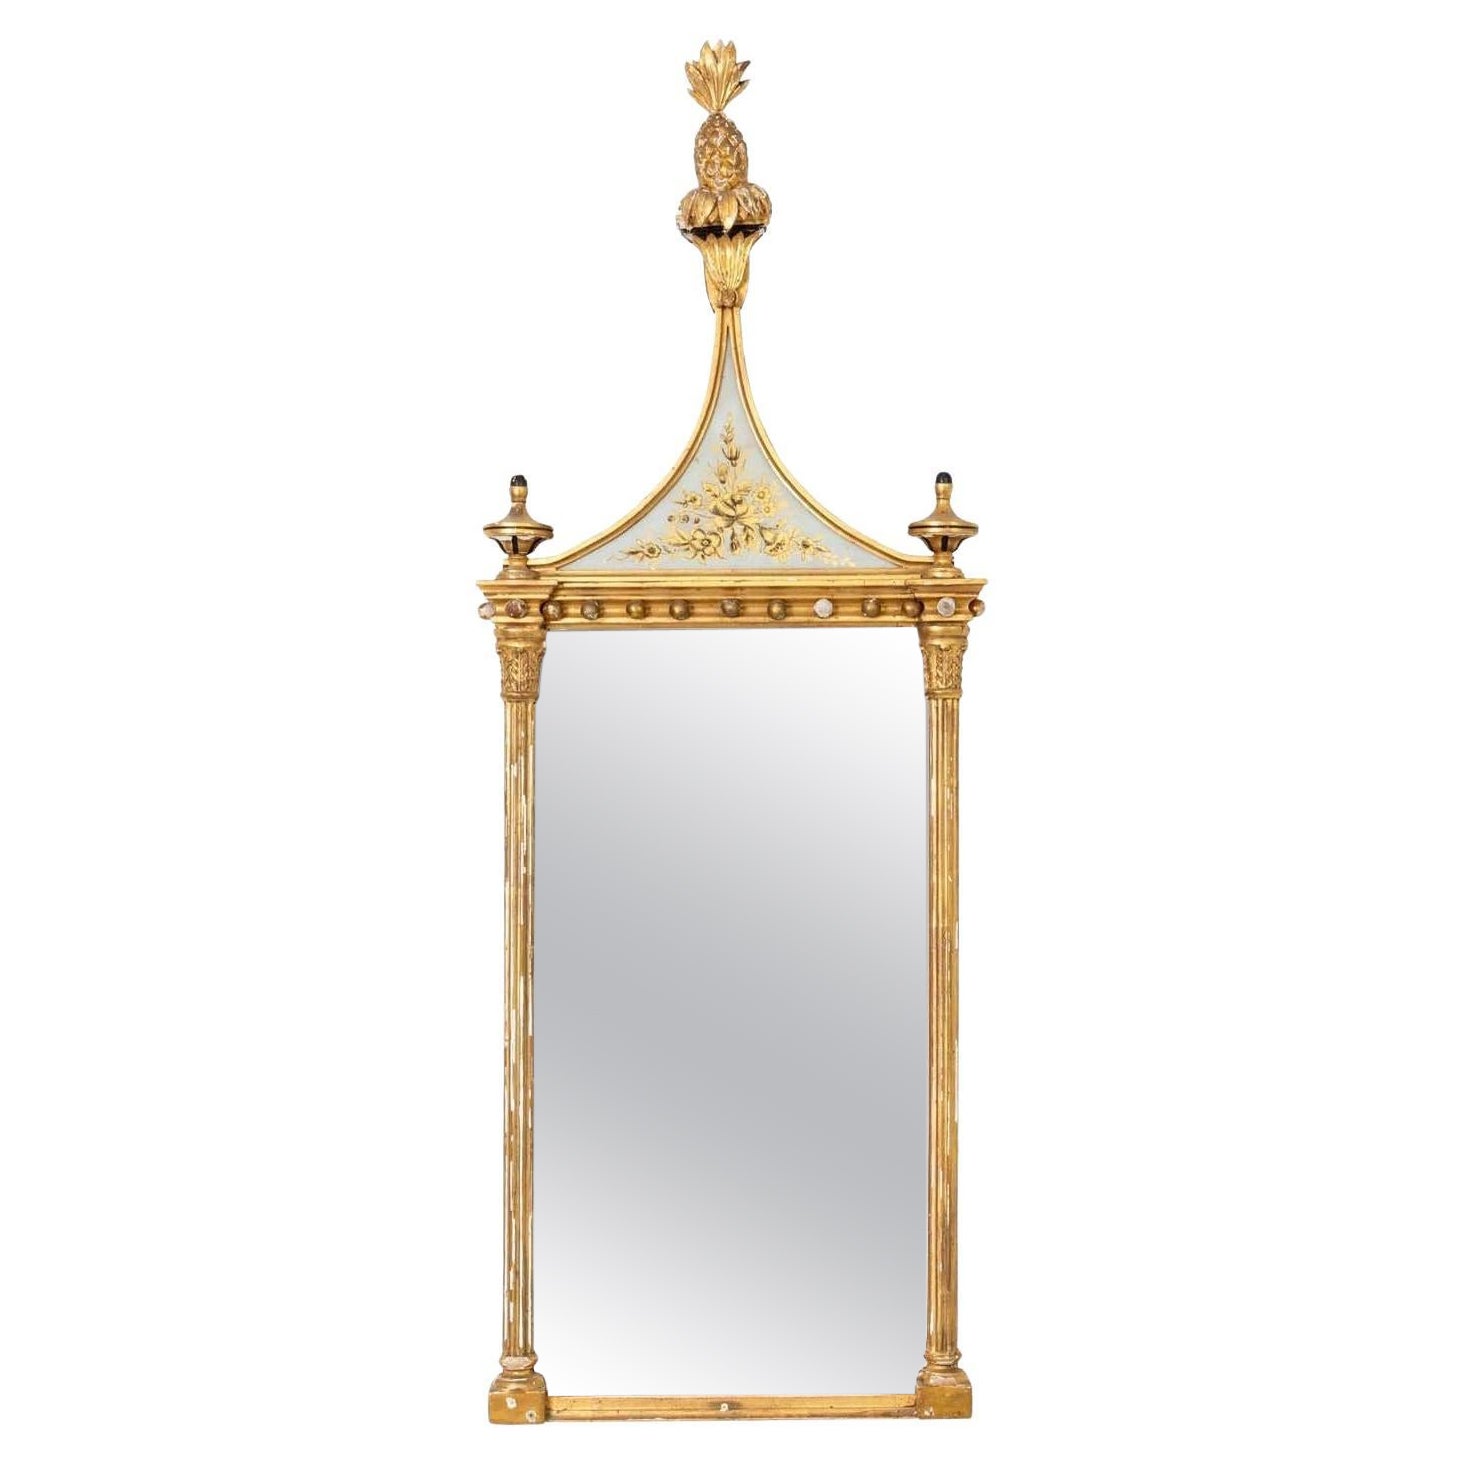 Federal Style Gilt Framed Mirror with Pineapple Finial, Early 20th C. American For Sale